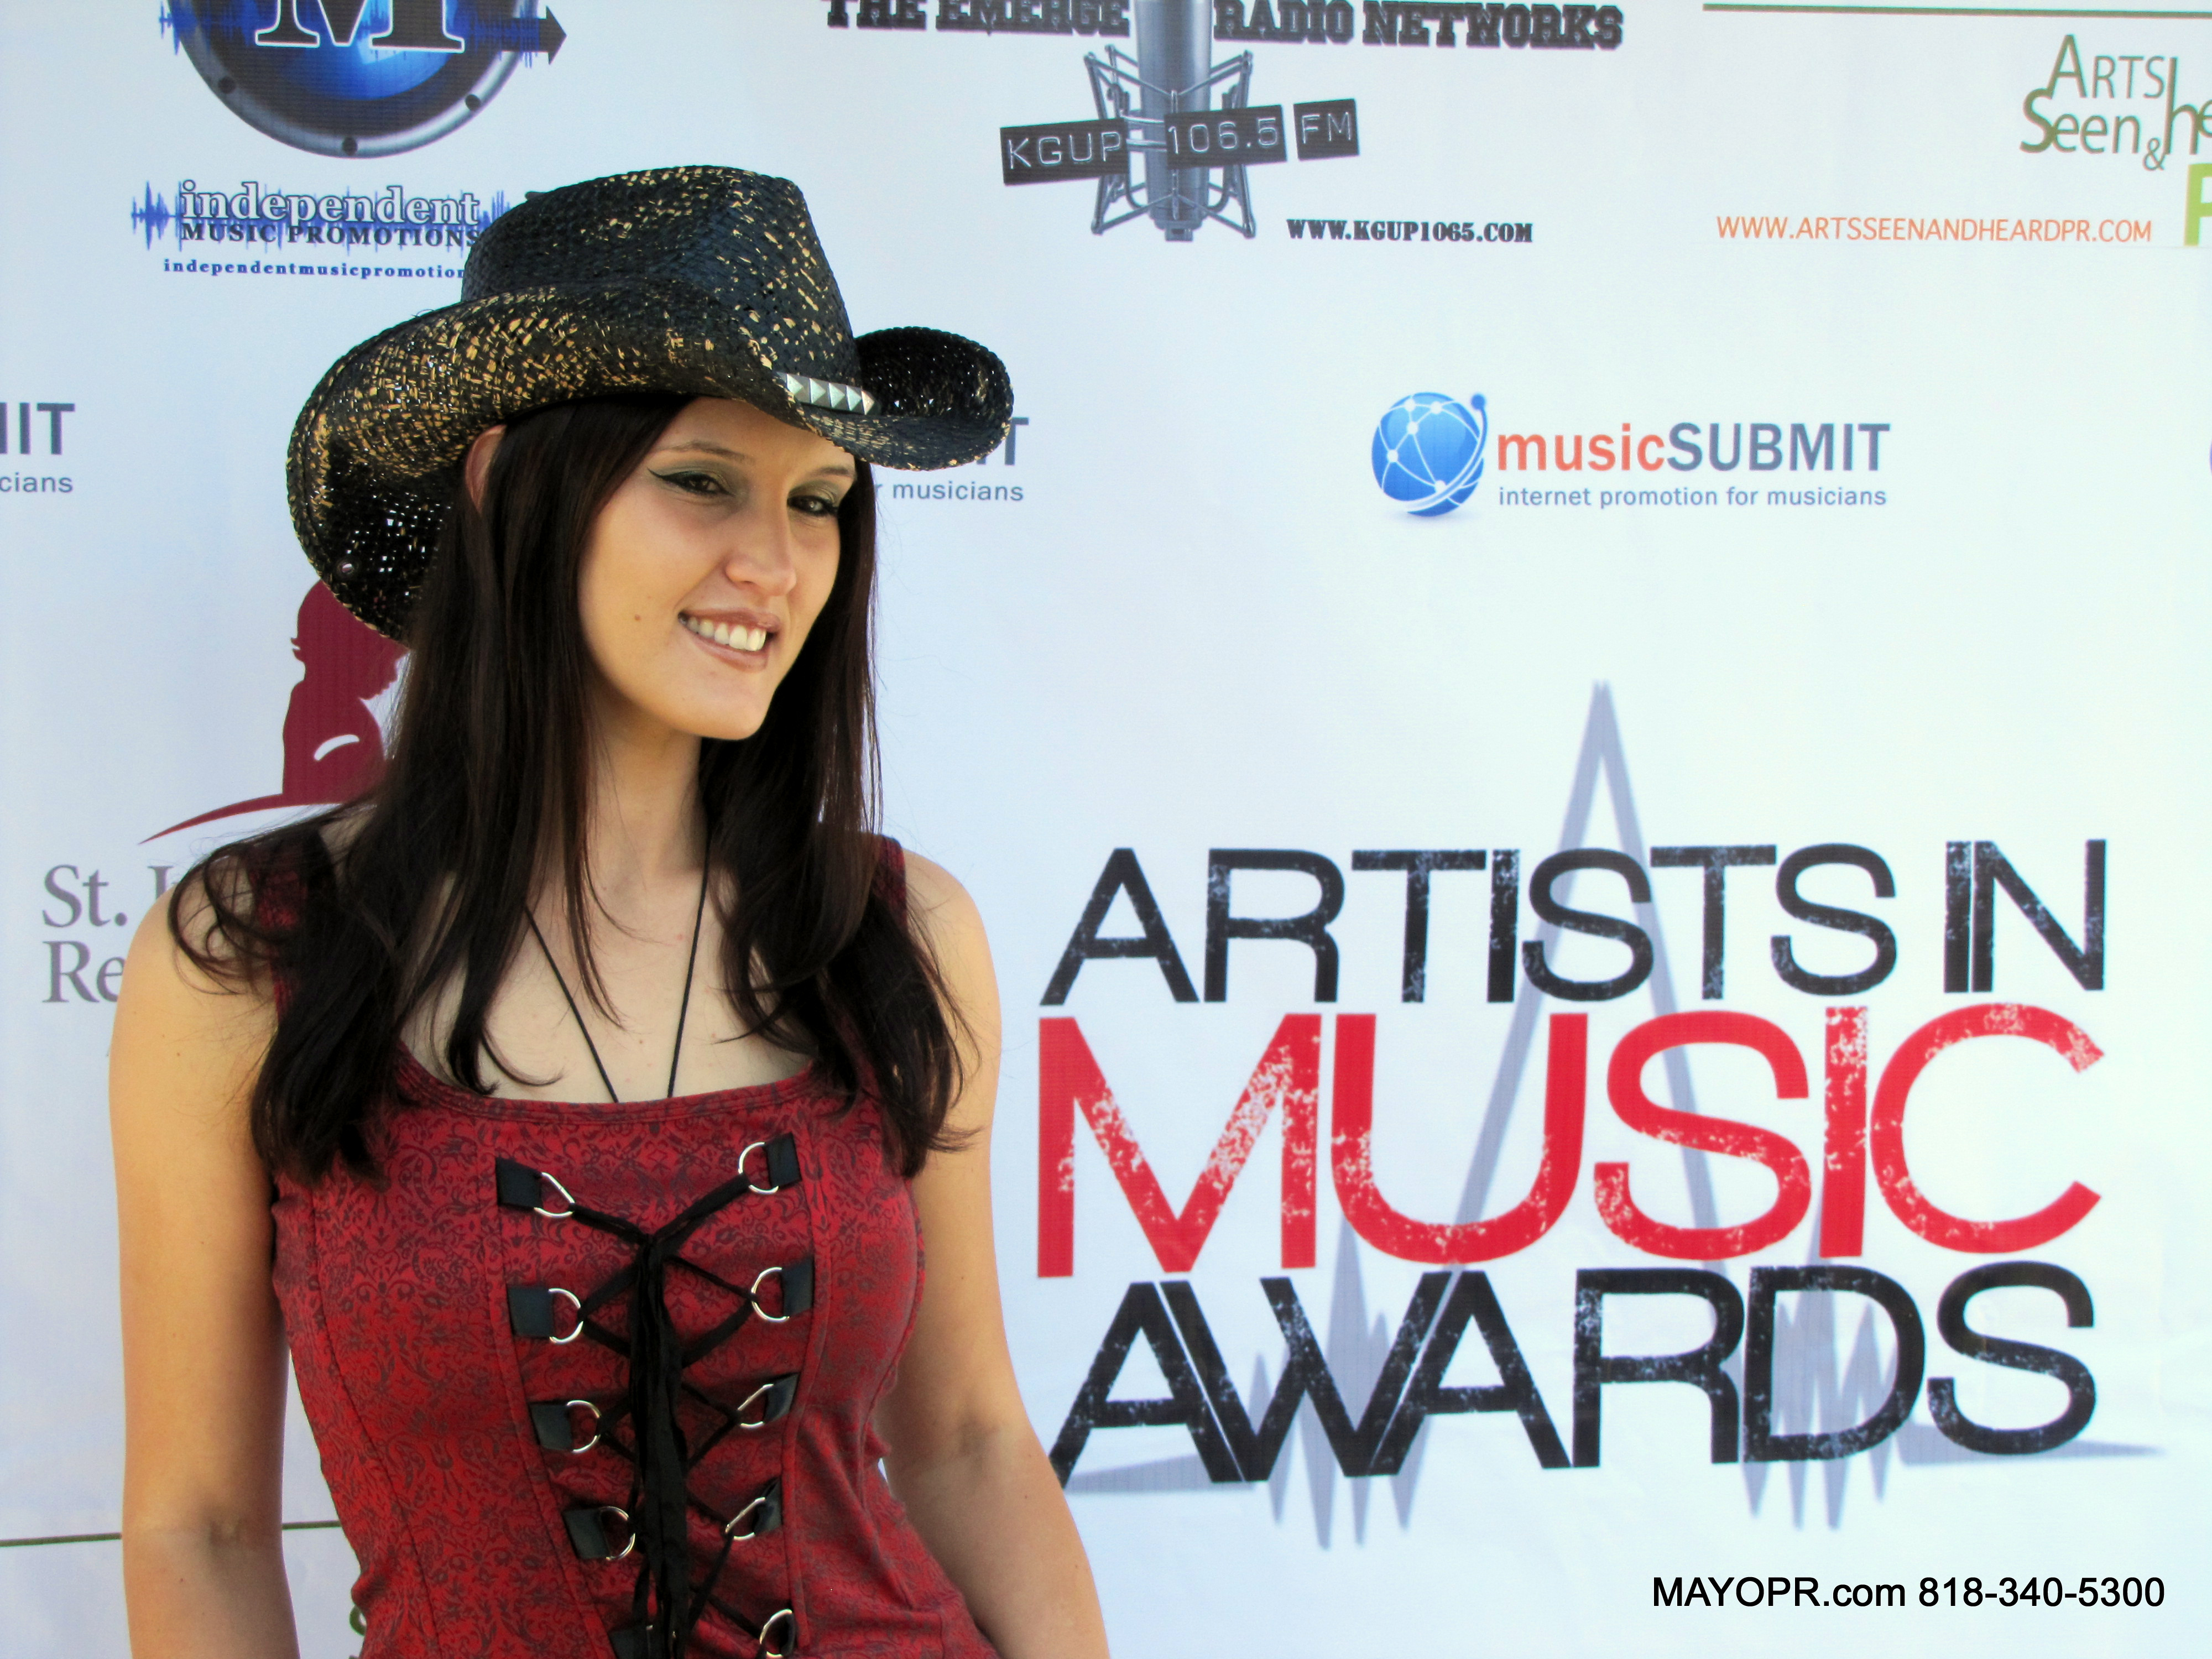 Best Country Western Singer/Songwriter and 2014 Artists In Music Awards nominee on the red carpet at a celebrity charity benefit in Hollywood, CA.